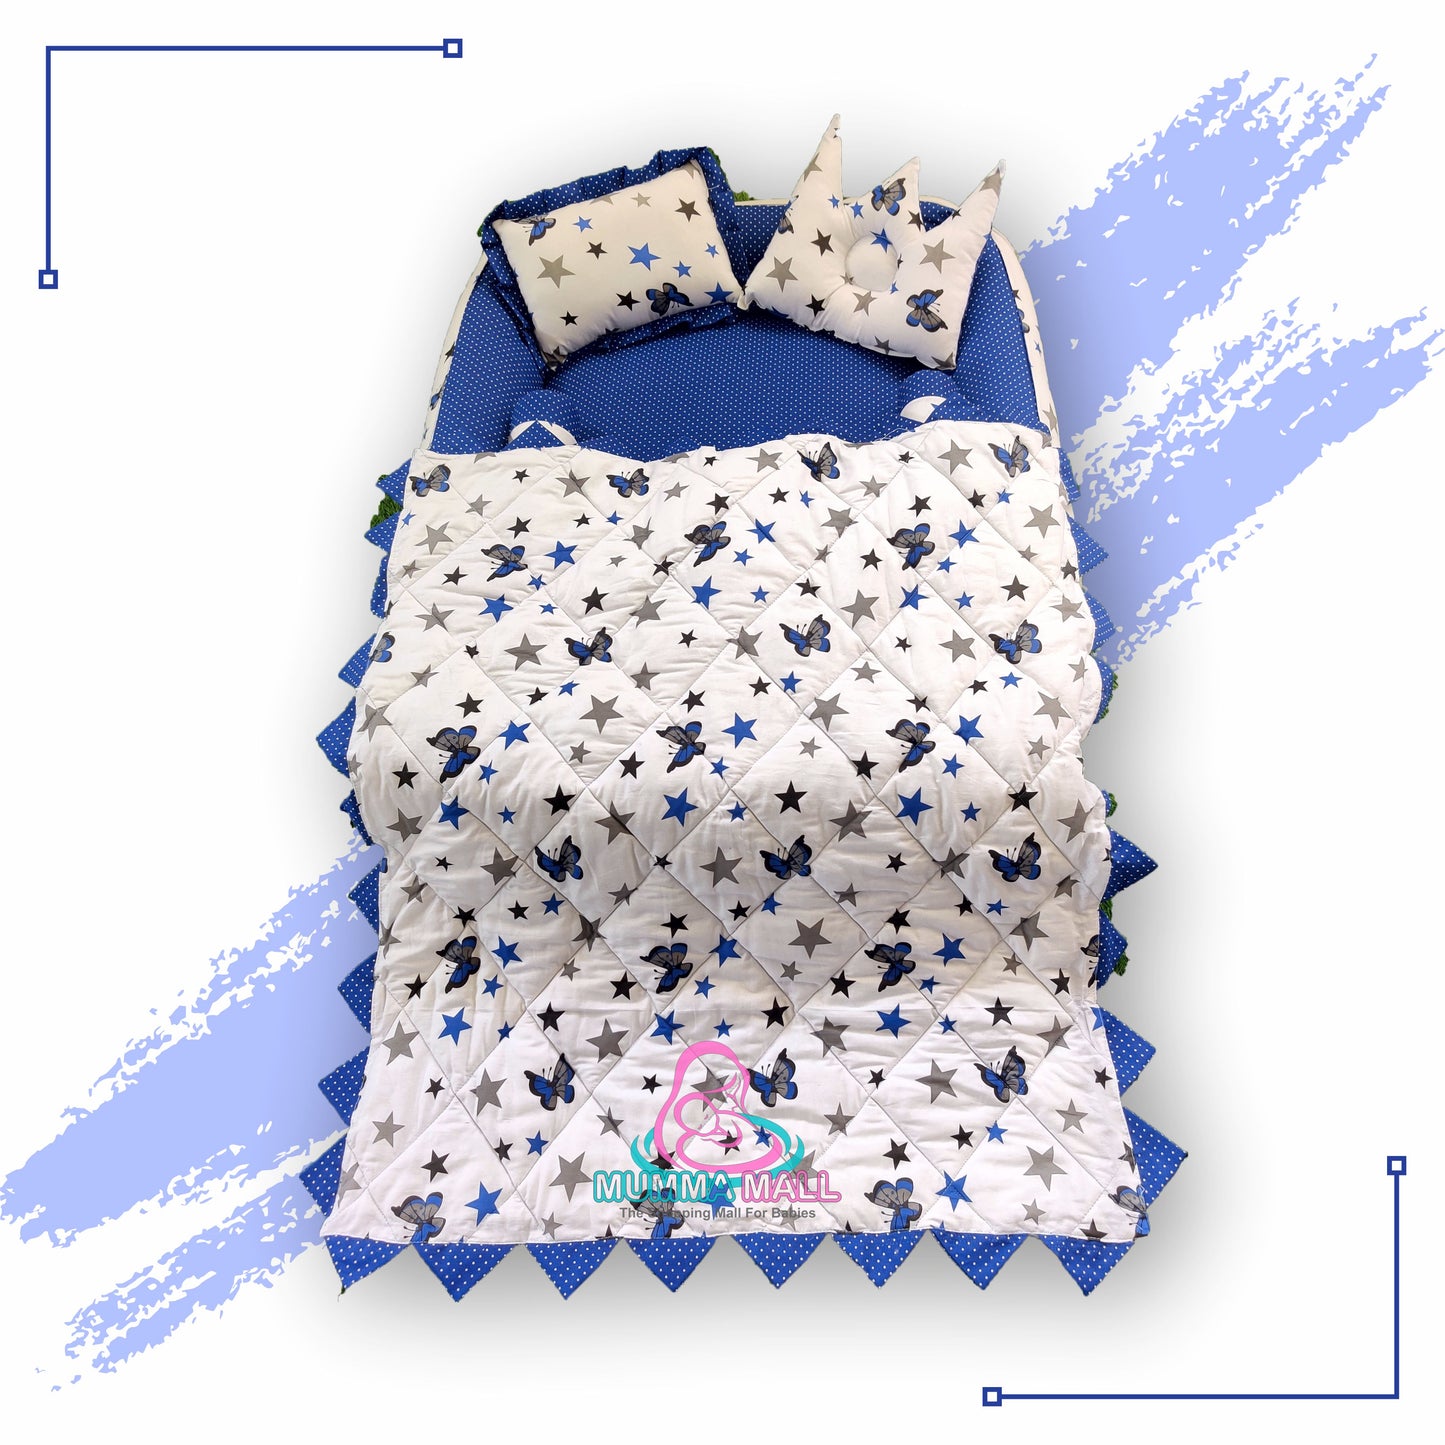 Baby box mattress with blanket and set of 4 pillows as neck support, side support and toy (Blue and White)